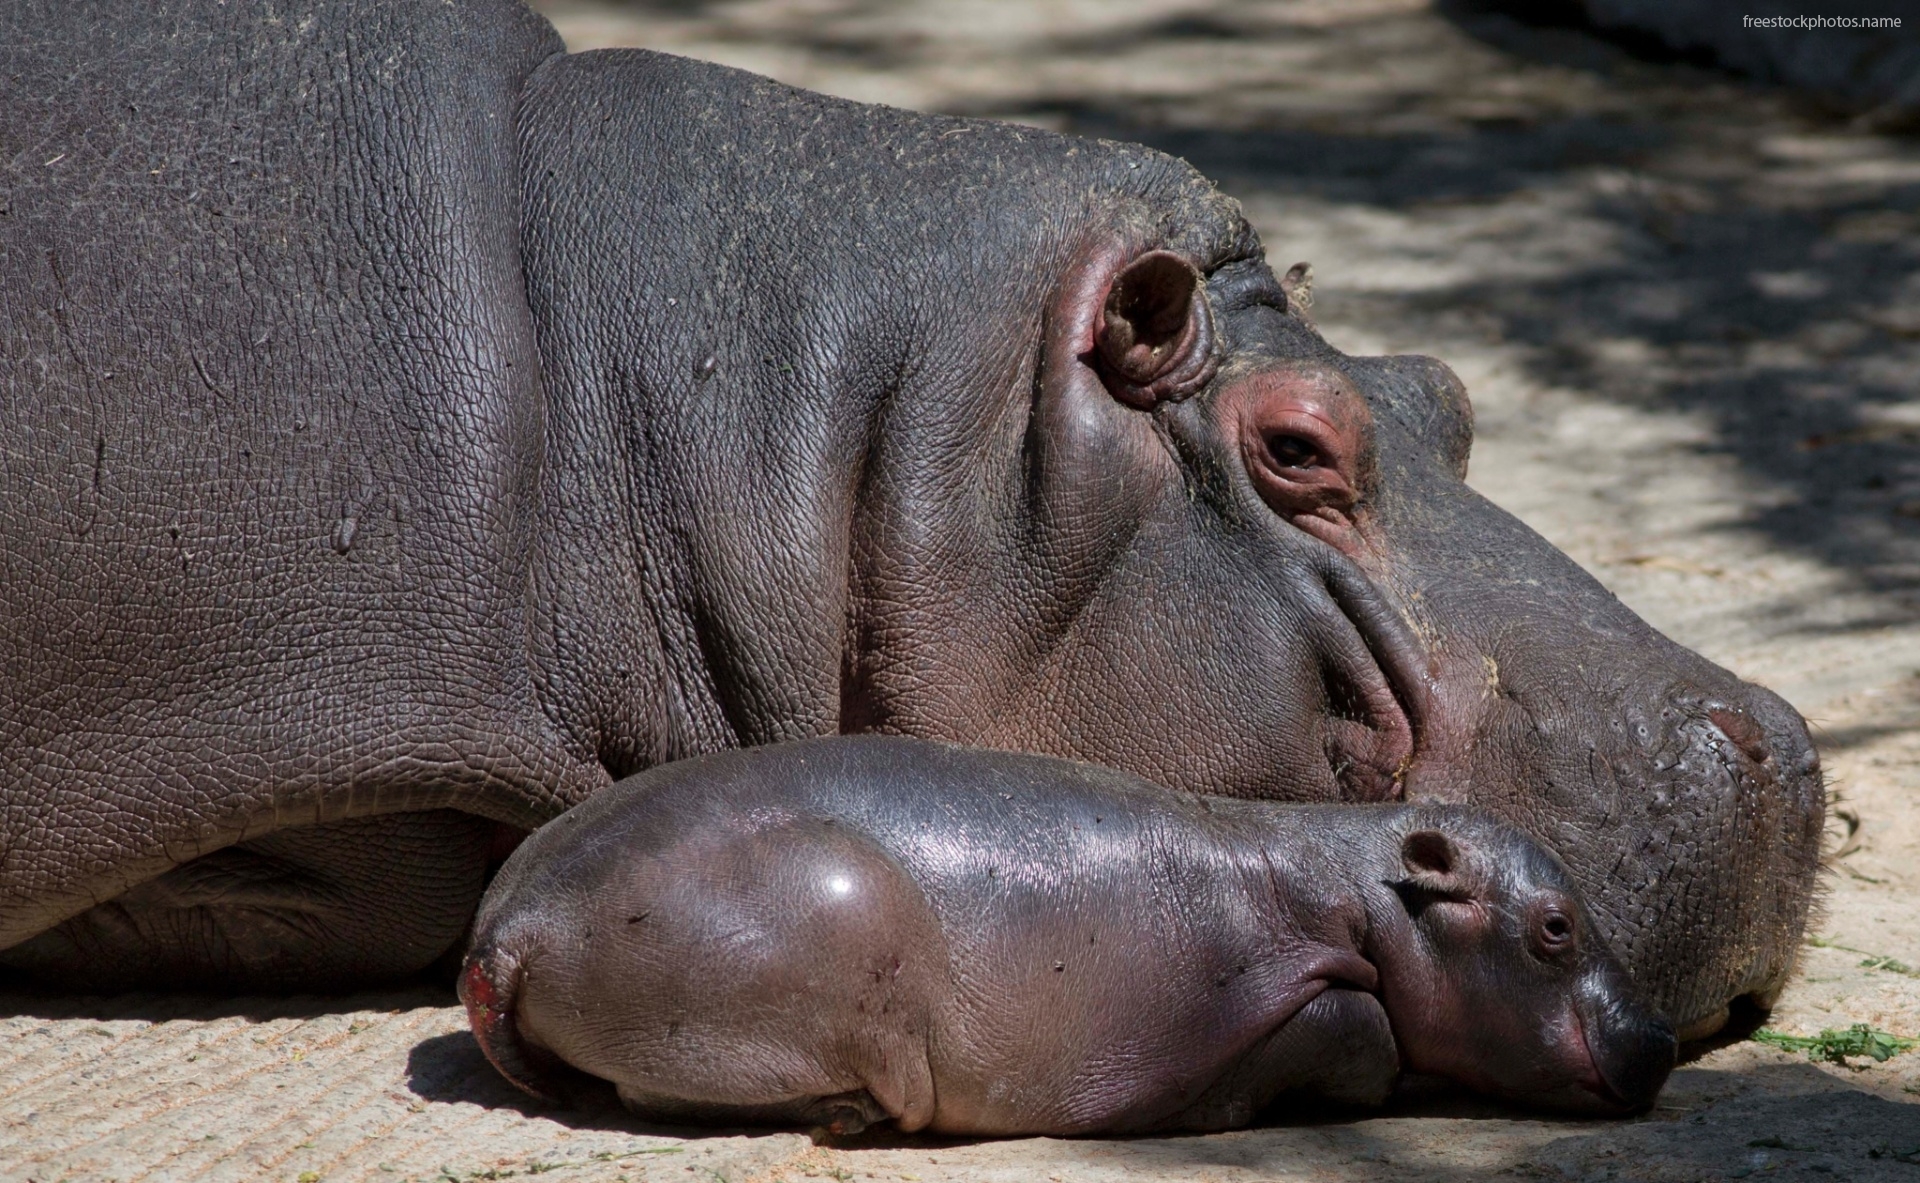 Stock Photos Of Hippo Baby With Mom Image Photography